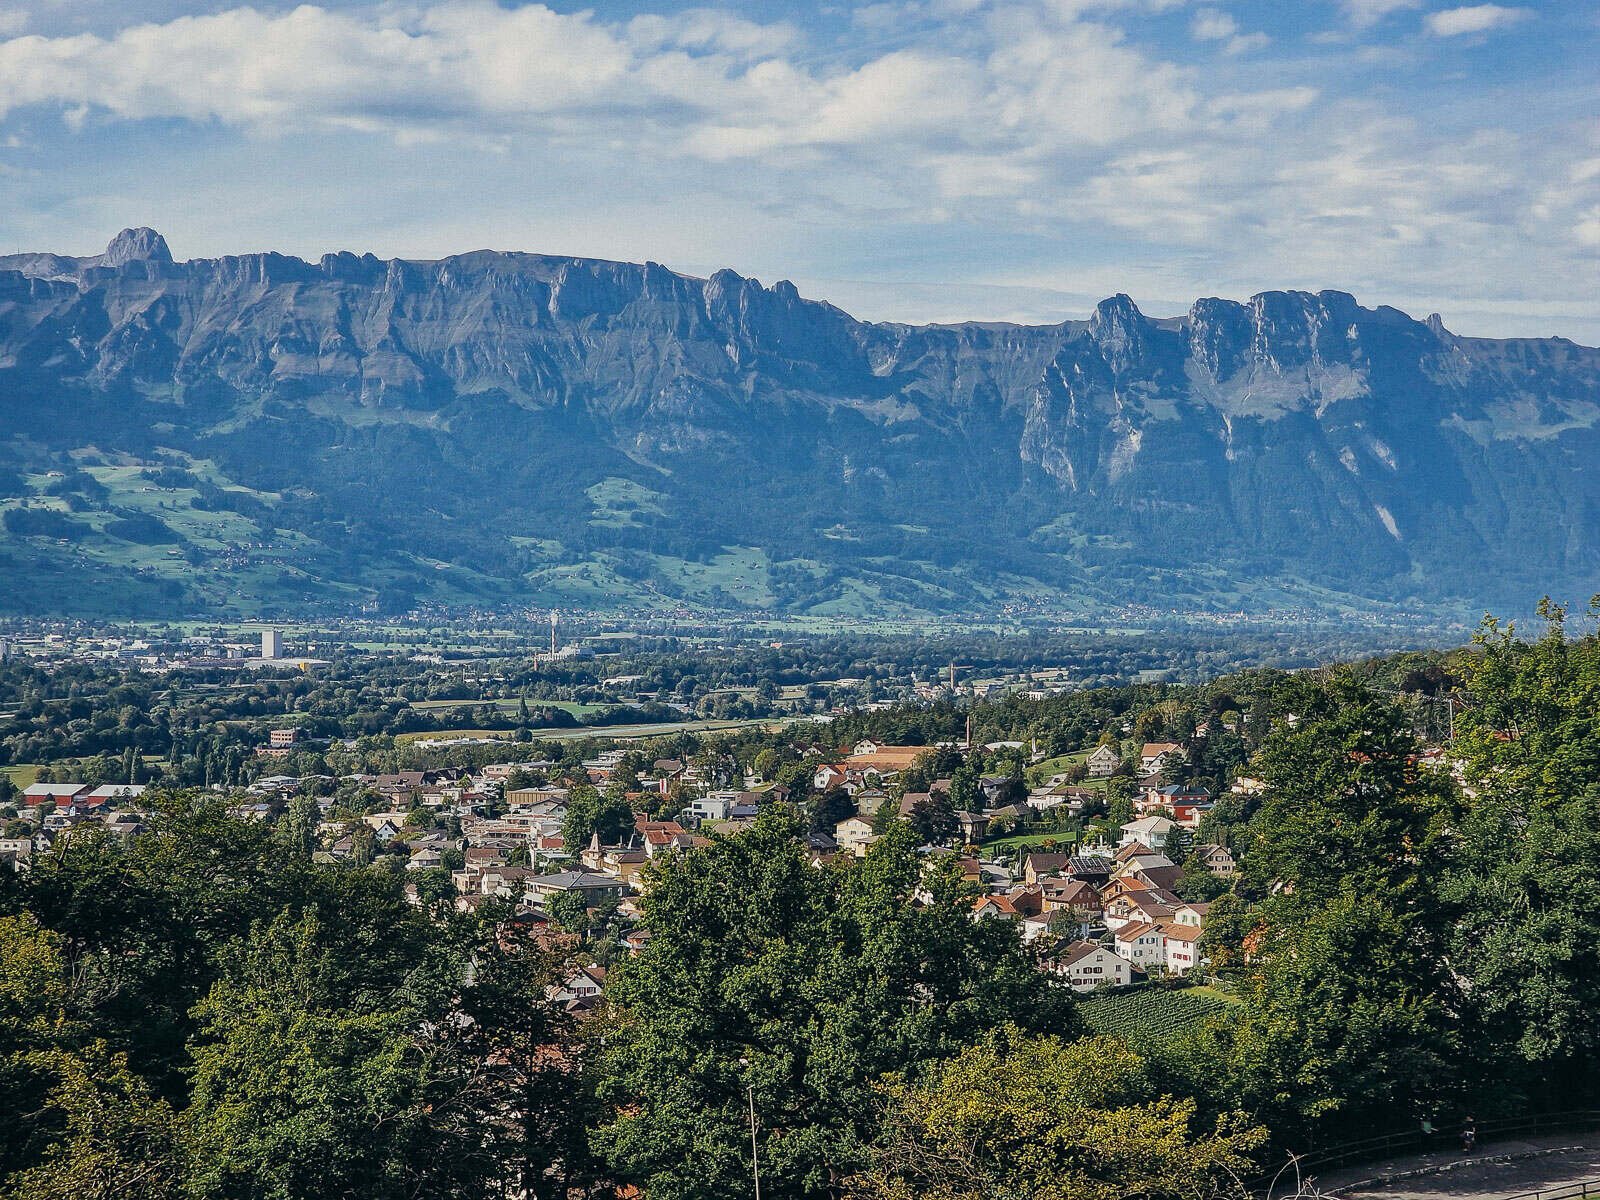 A panoramic view of Liechtenstein with lots of greenery, a town in the distance and mountains in the background